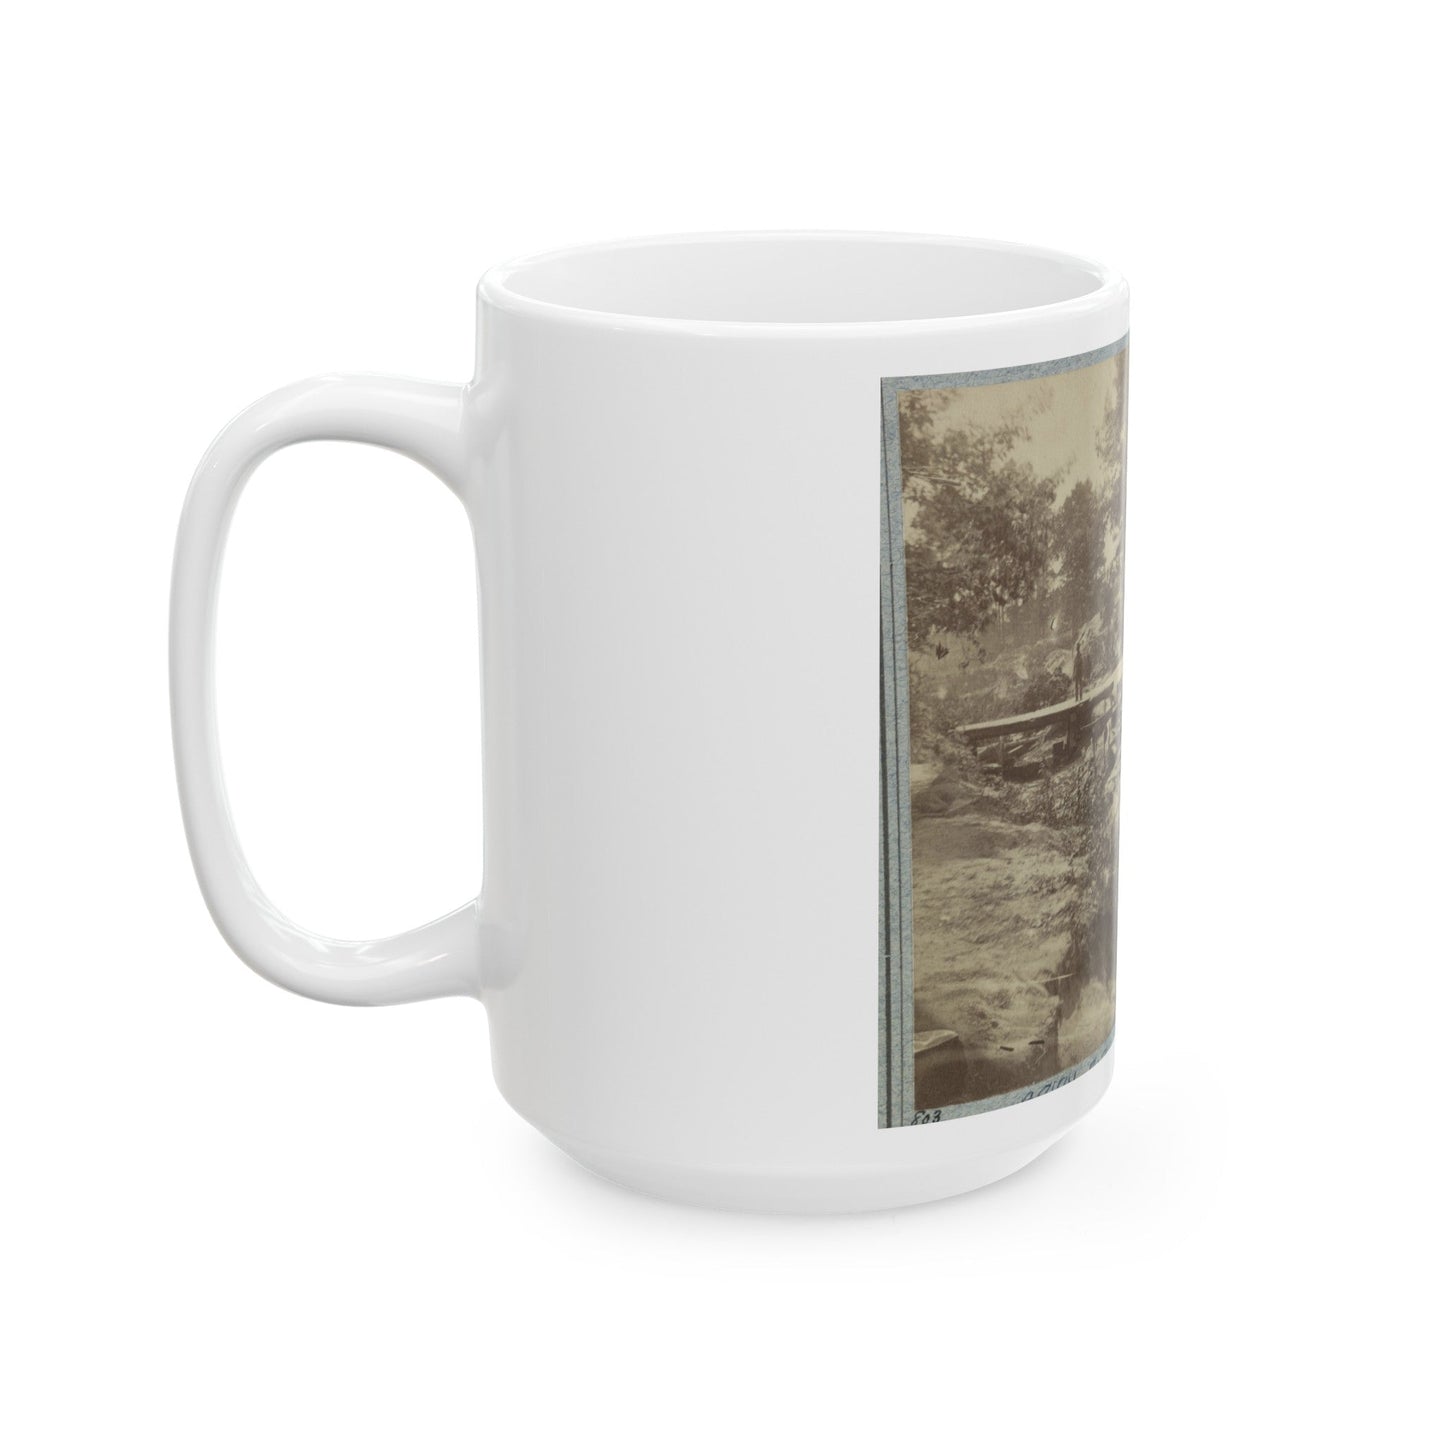 View Of Bombproof Tents Occupied By U.S. Colored Troops In Front Of Petersburg, Va., August 7, 1864 (U.S. Civil War) White Coffee Mug